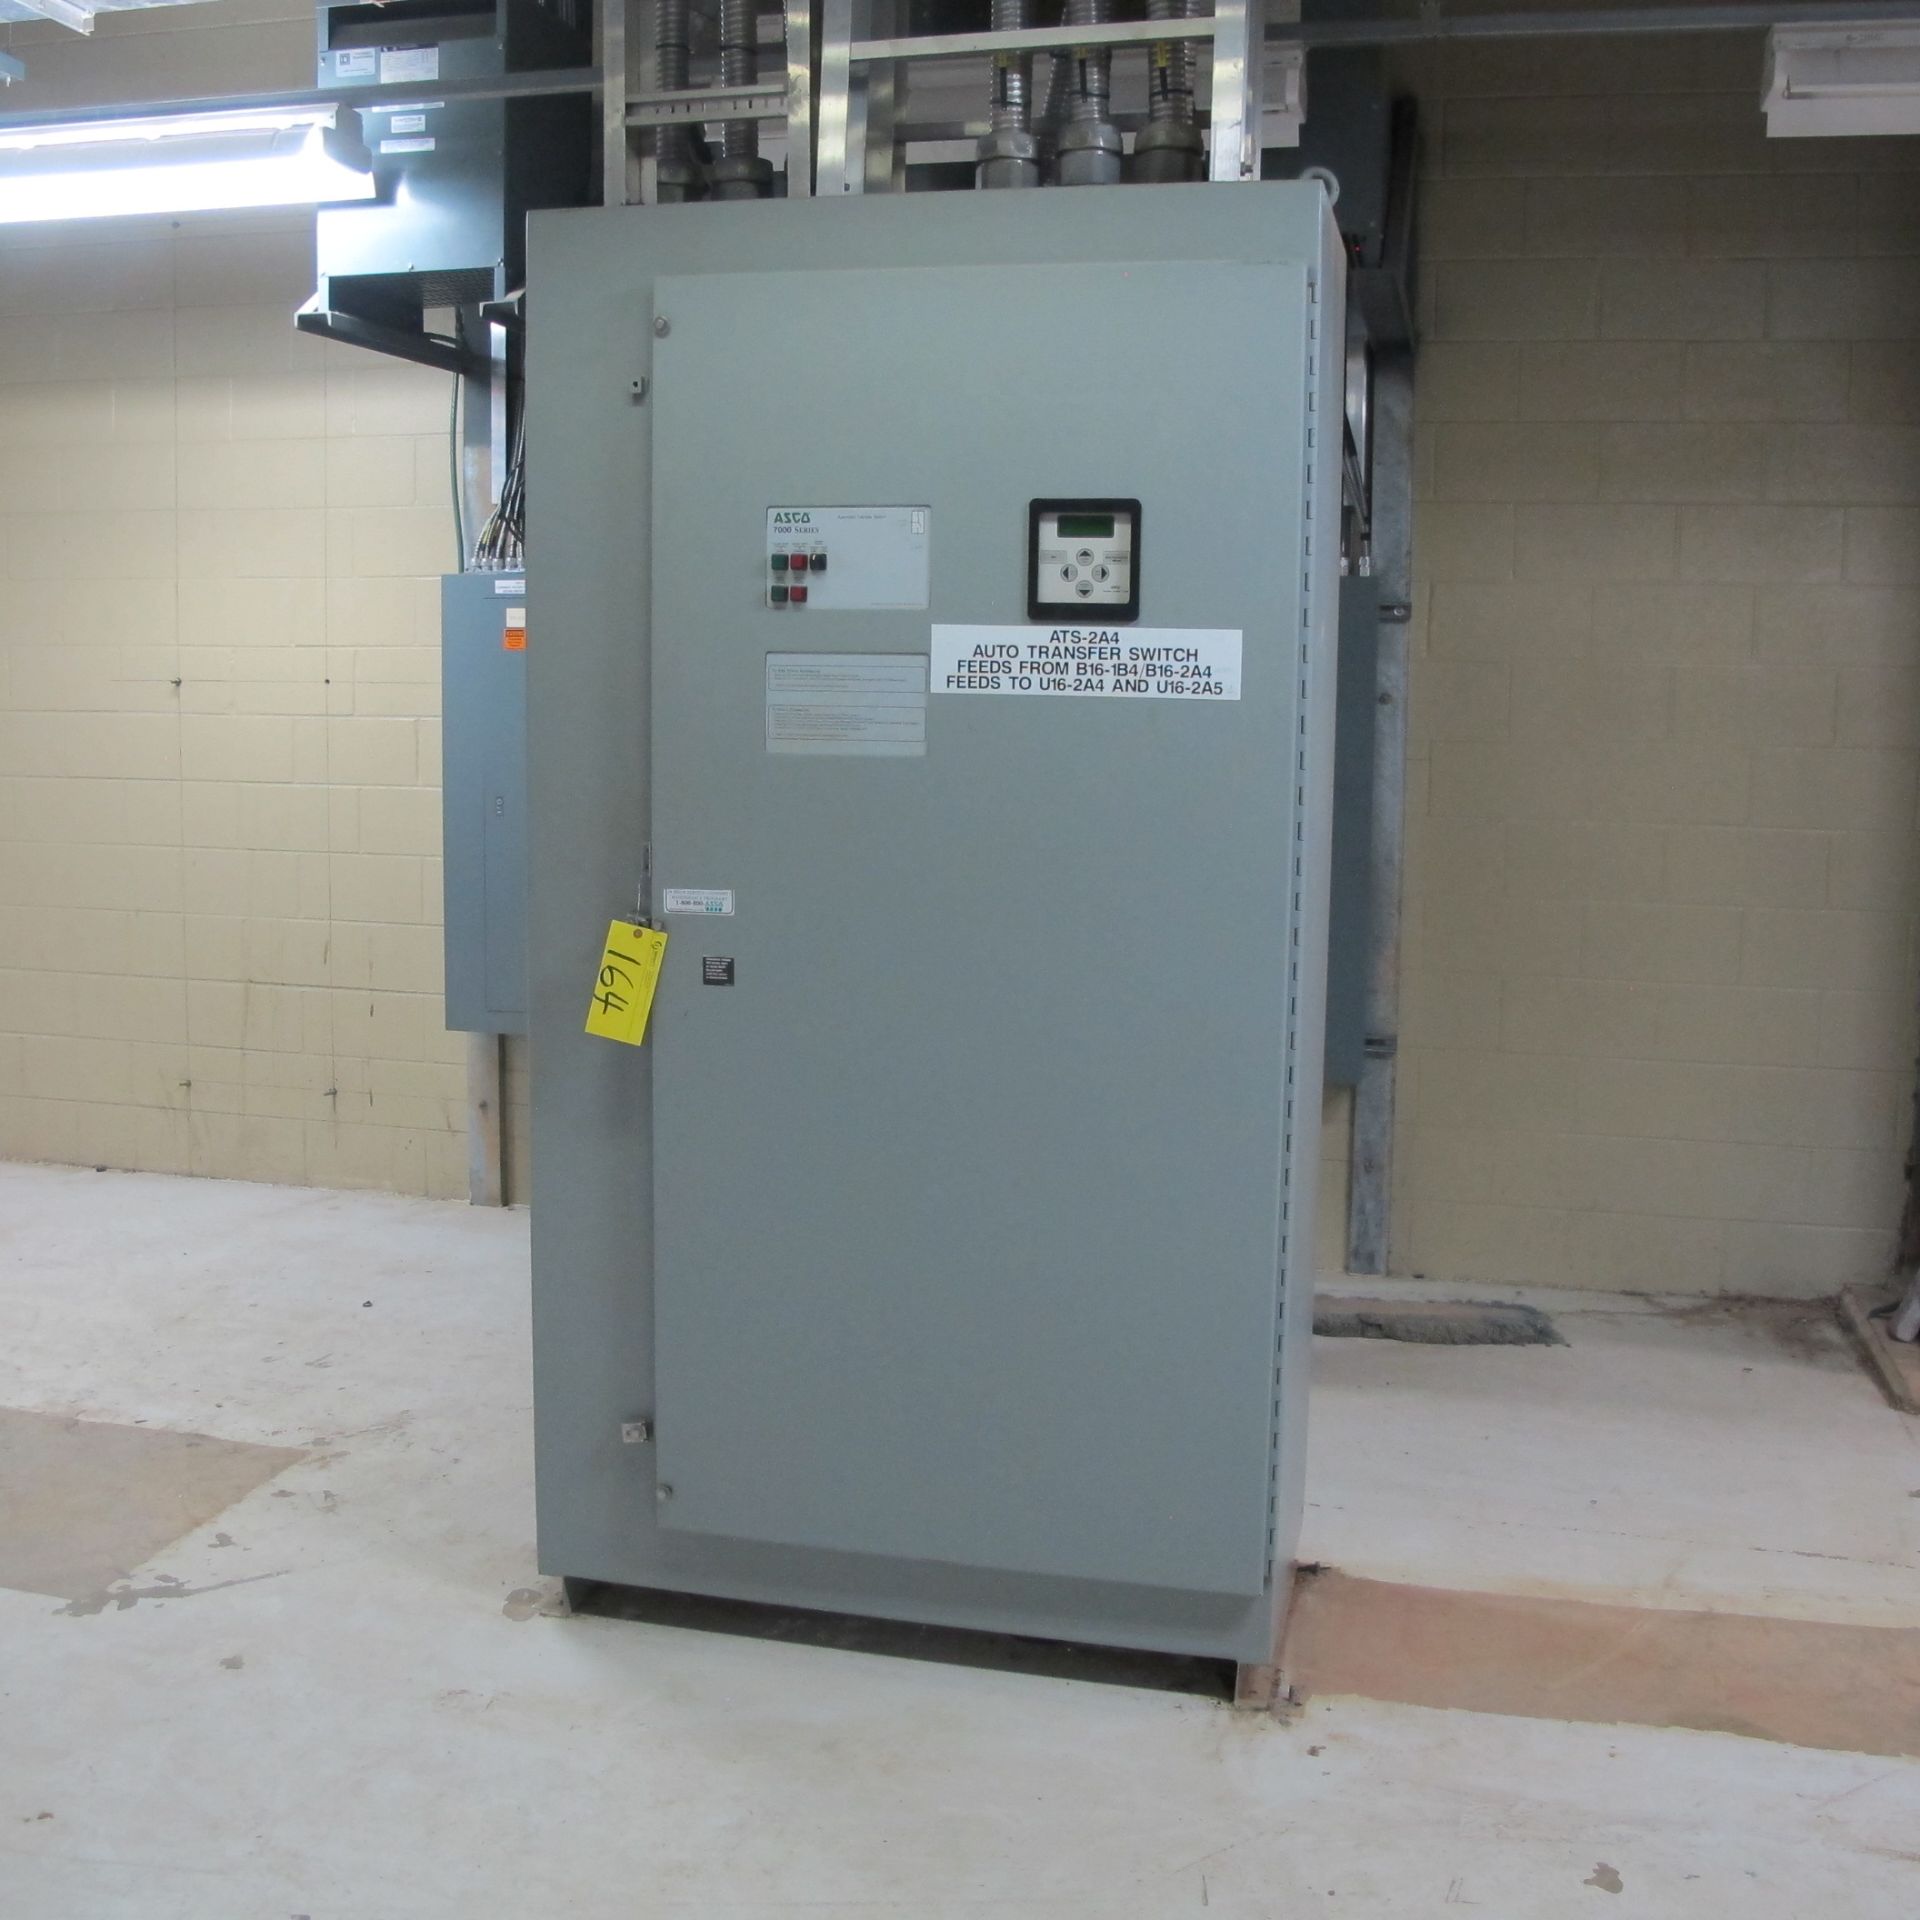 ASCA 7000 SERIES AUTOMATIC TRANSFER SWITCH ATS-2A4 (CUT WIRE 6" FROM PANEL) - Image 2 of 3